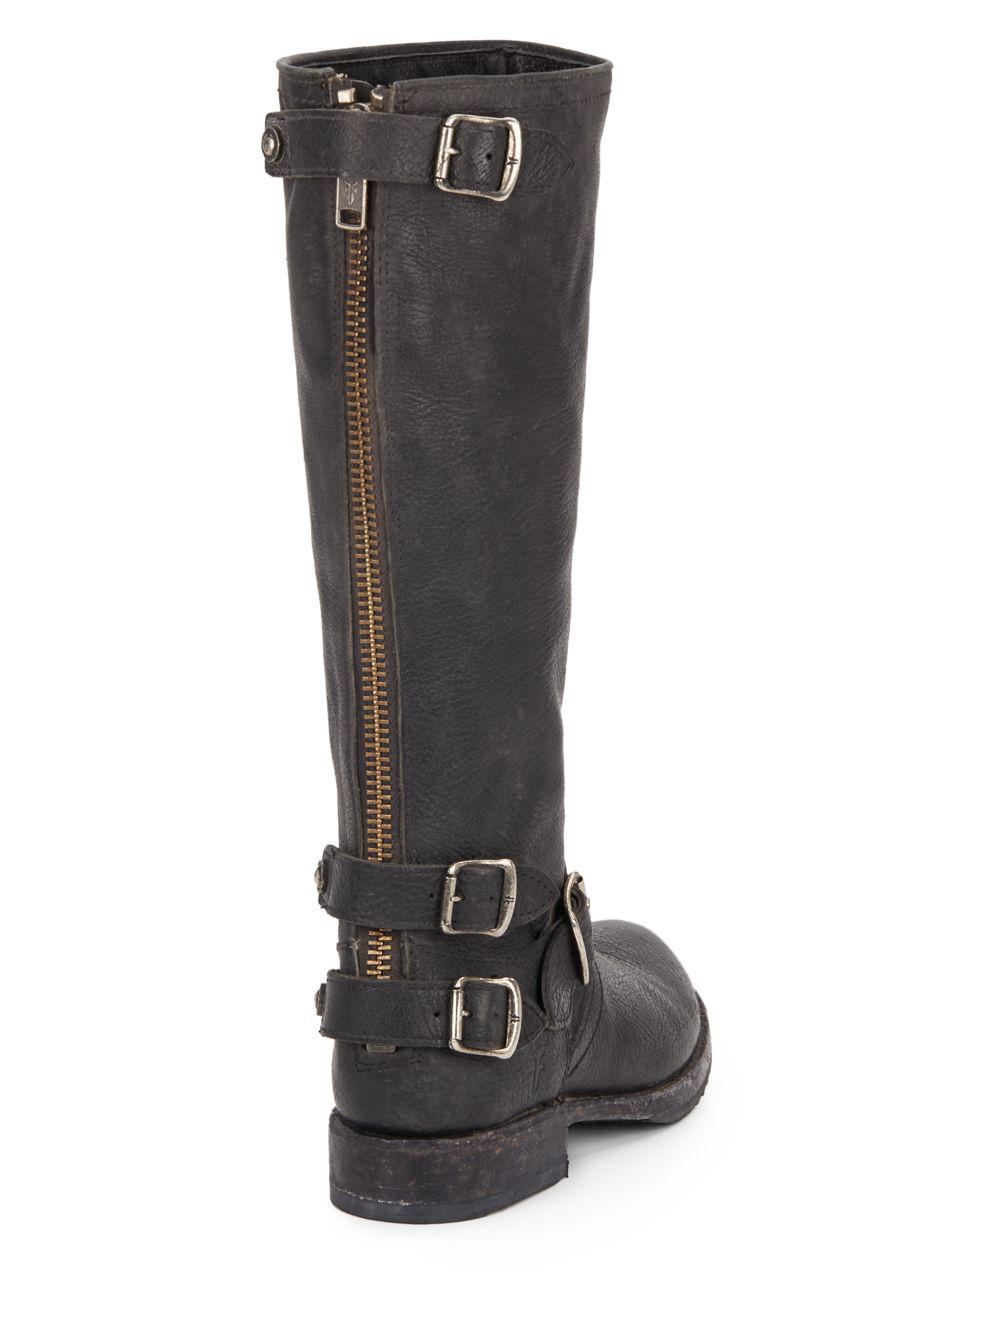 Lyst - Frye Veronica Knee-high Leather Buckle Boots in Black